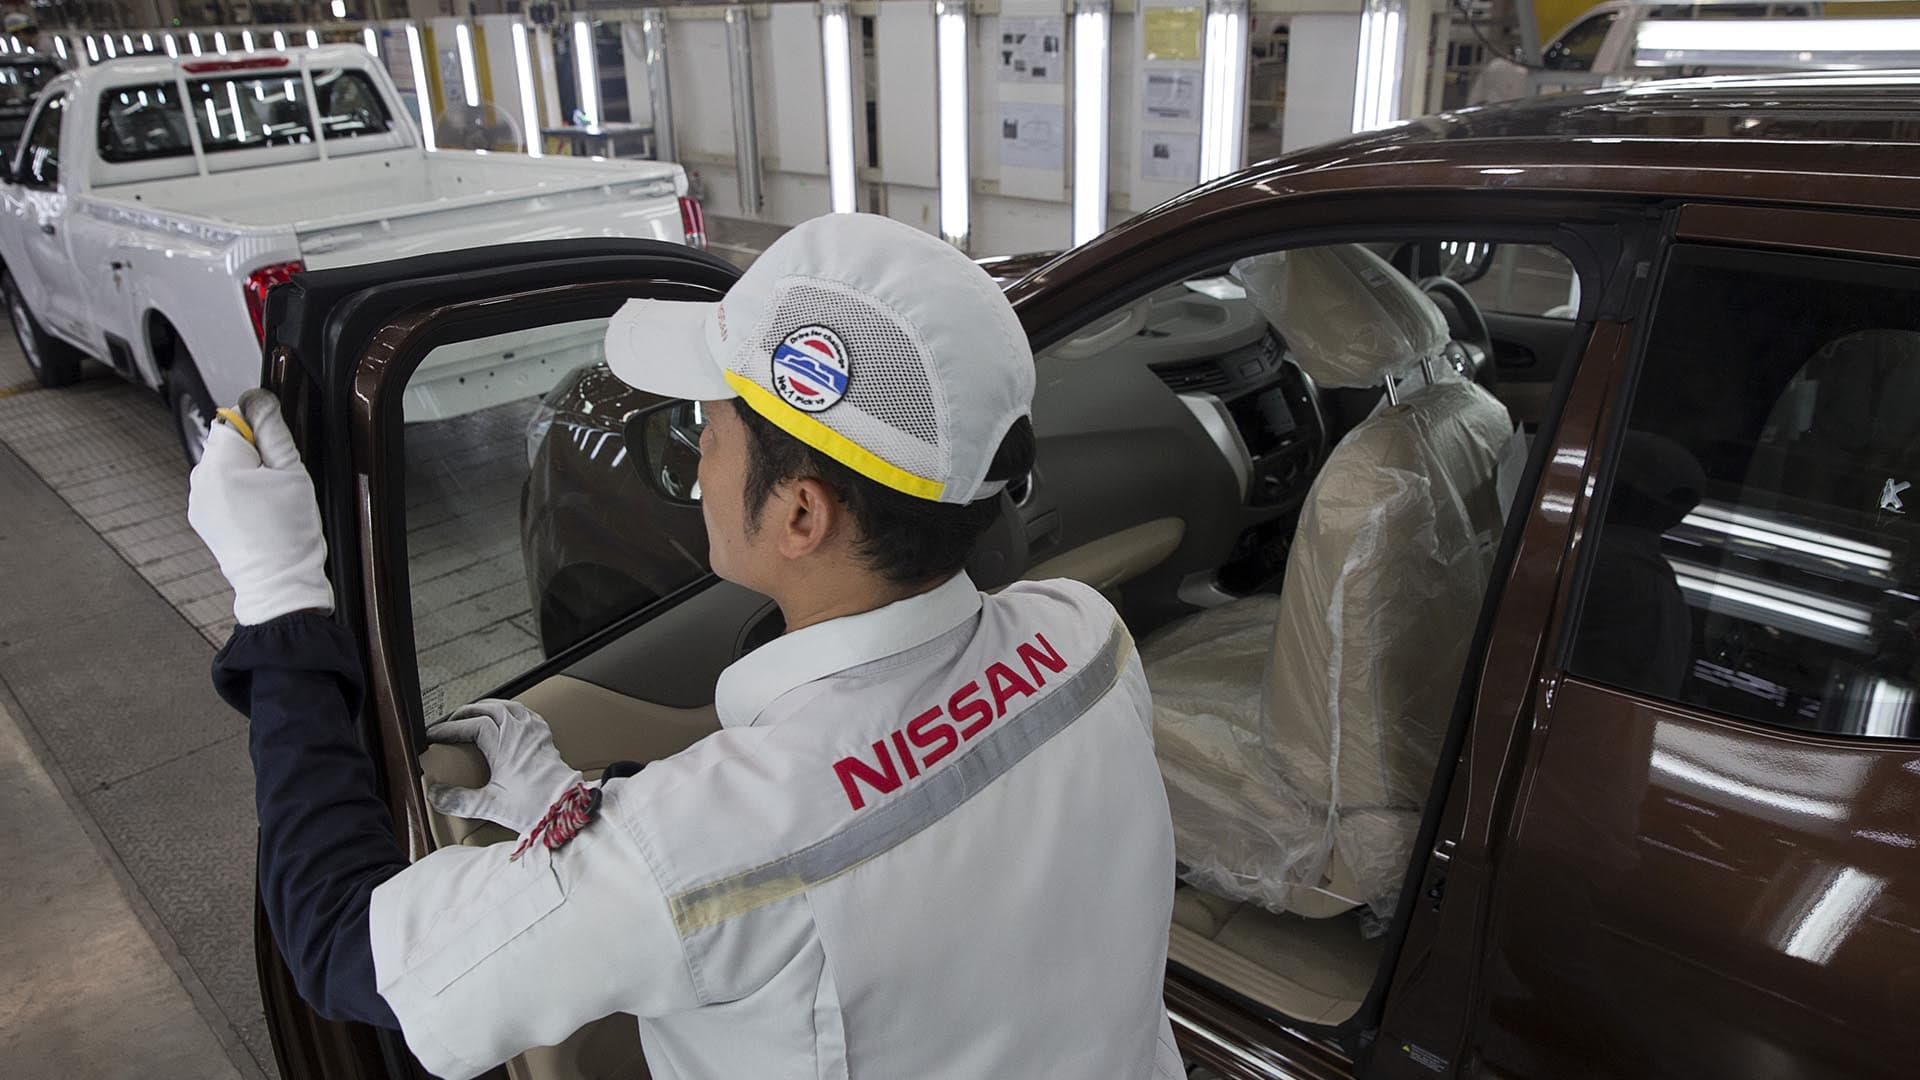 Nissan is Resuming Production of Its Japanese Vehicles After Inspection Controversy